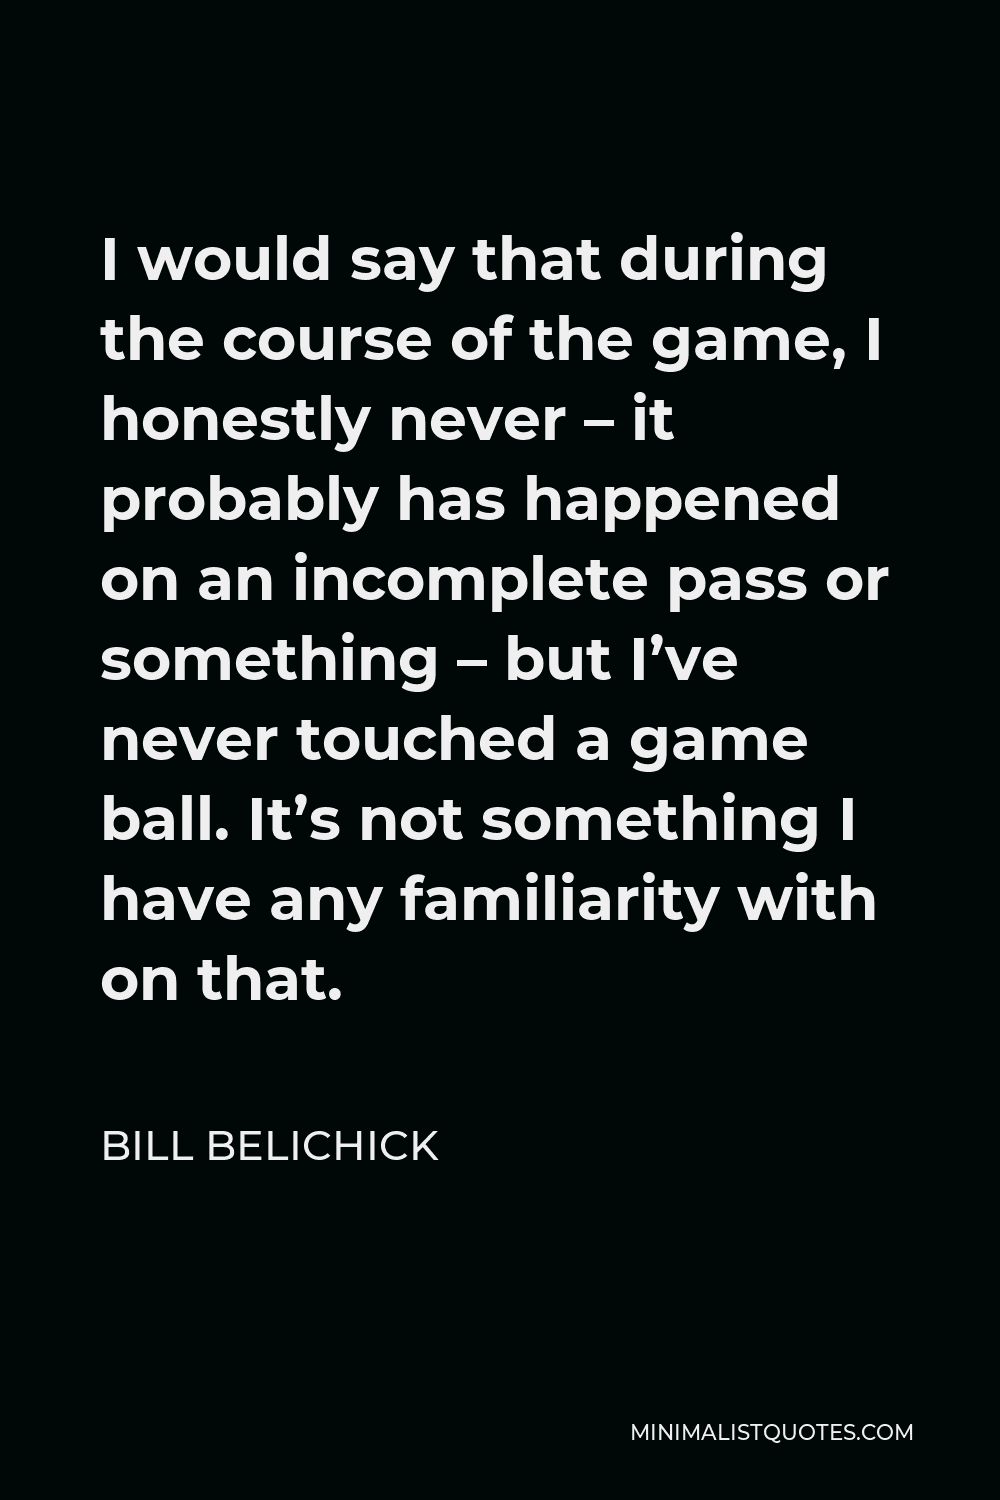 Bill Belichick Quote - I would say that during the course of the game, I honestly never – it probably has happened on an incomplete pass or something – but I’ve never touched a game ball. It’s not something I have any familiarity with on that.